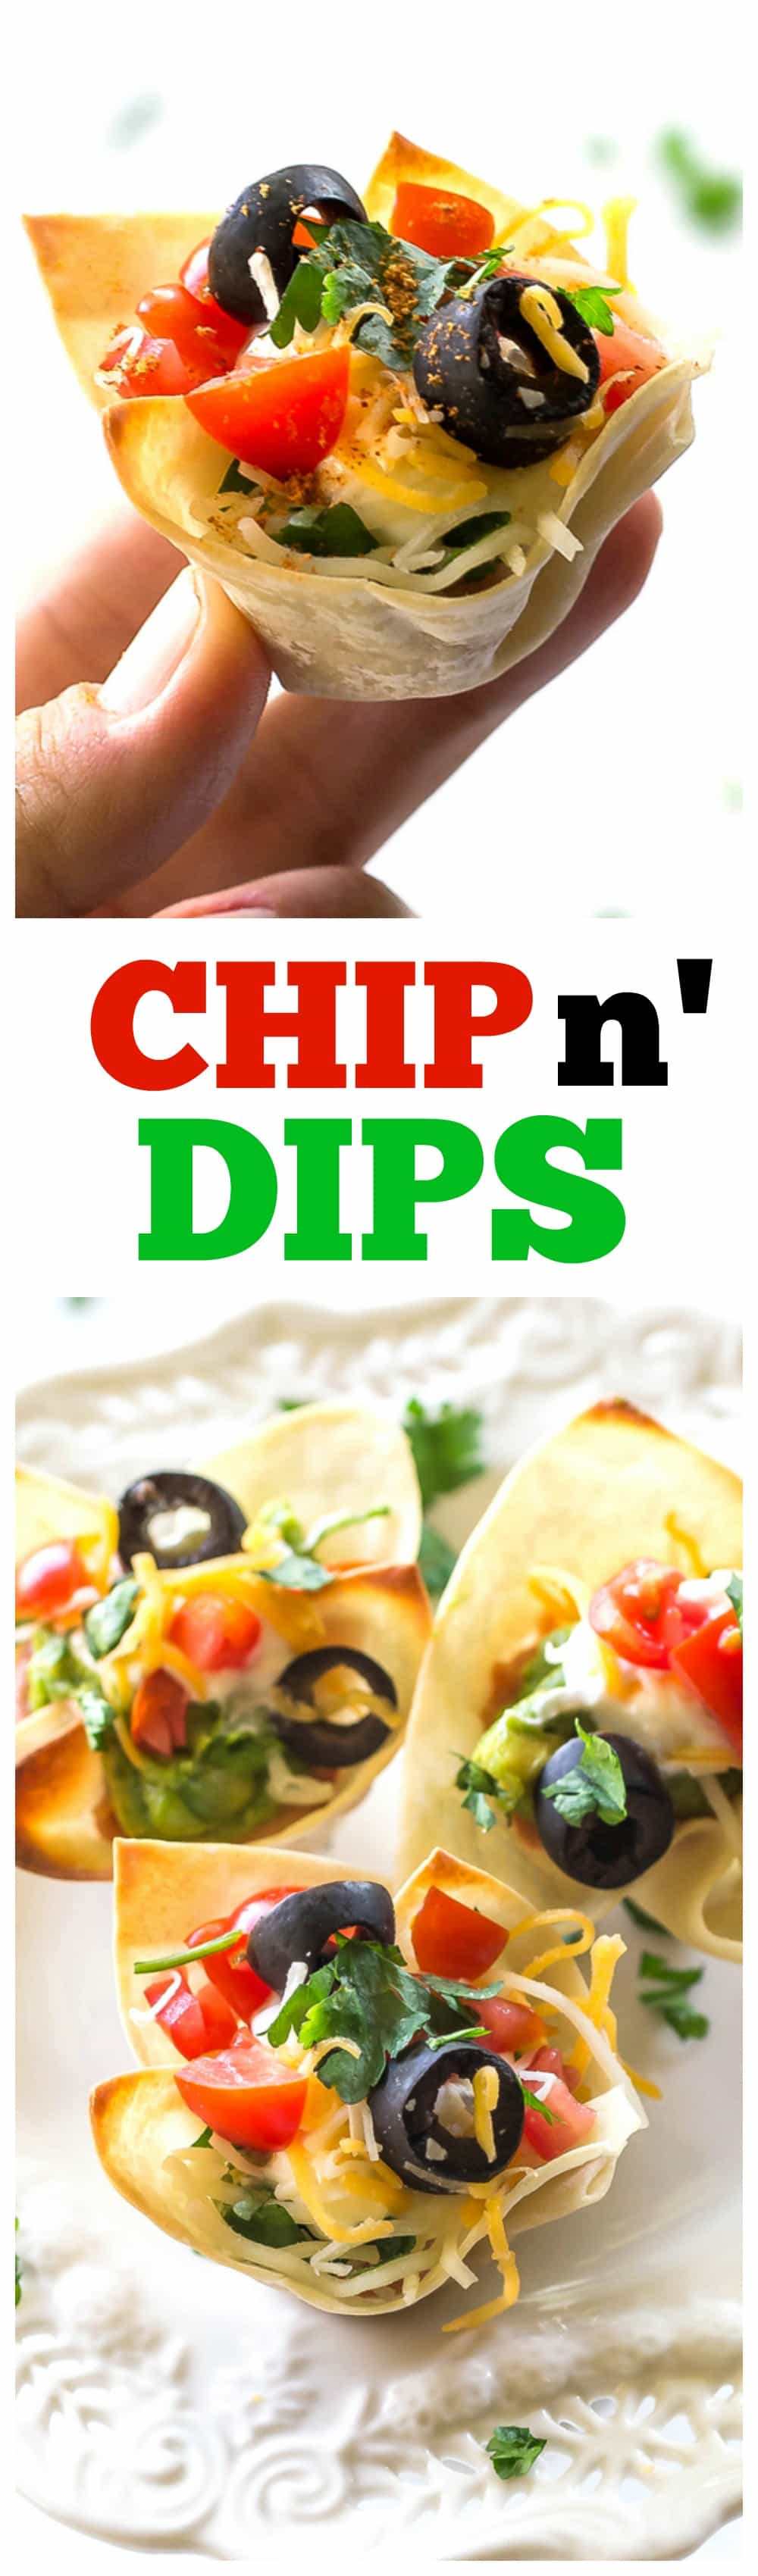 Chip n' Dips - Delicious bean dip and the chip all in one convenient package. A great bite sized appetizer. the-girl-who-ate-everything.com